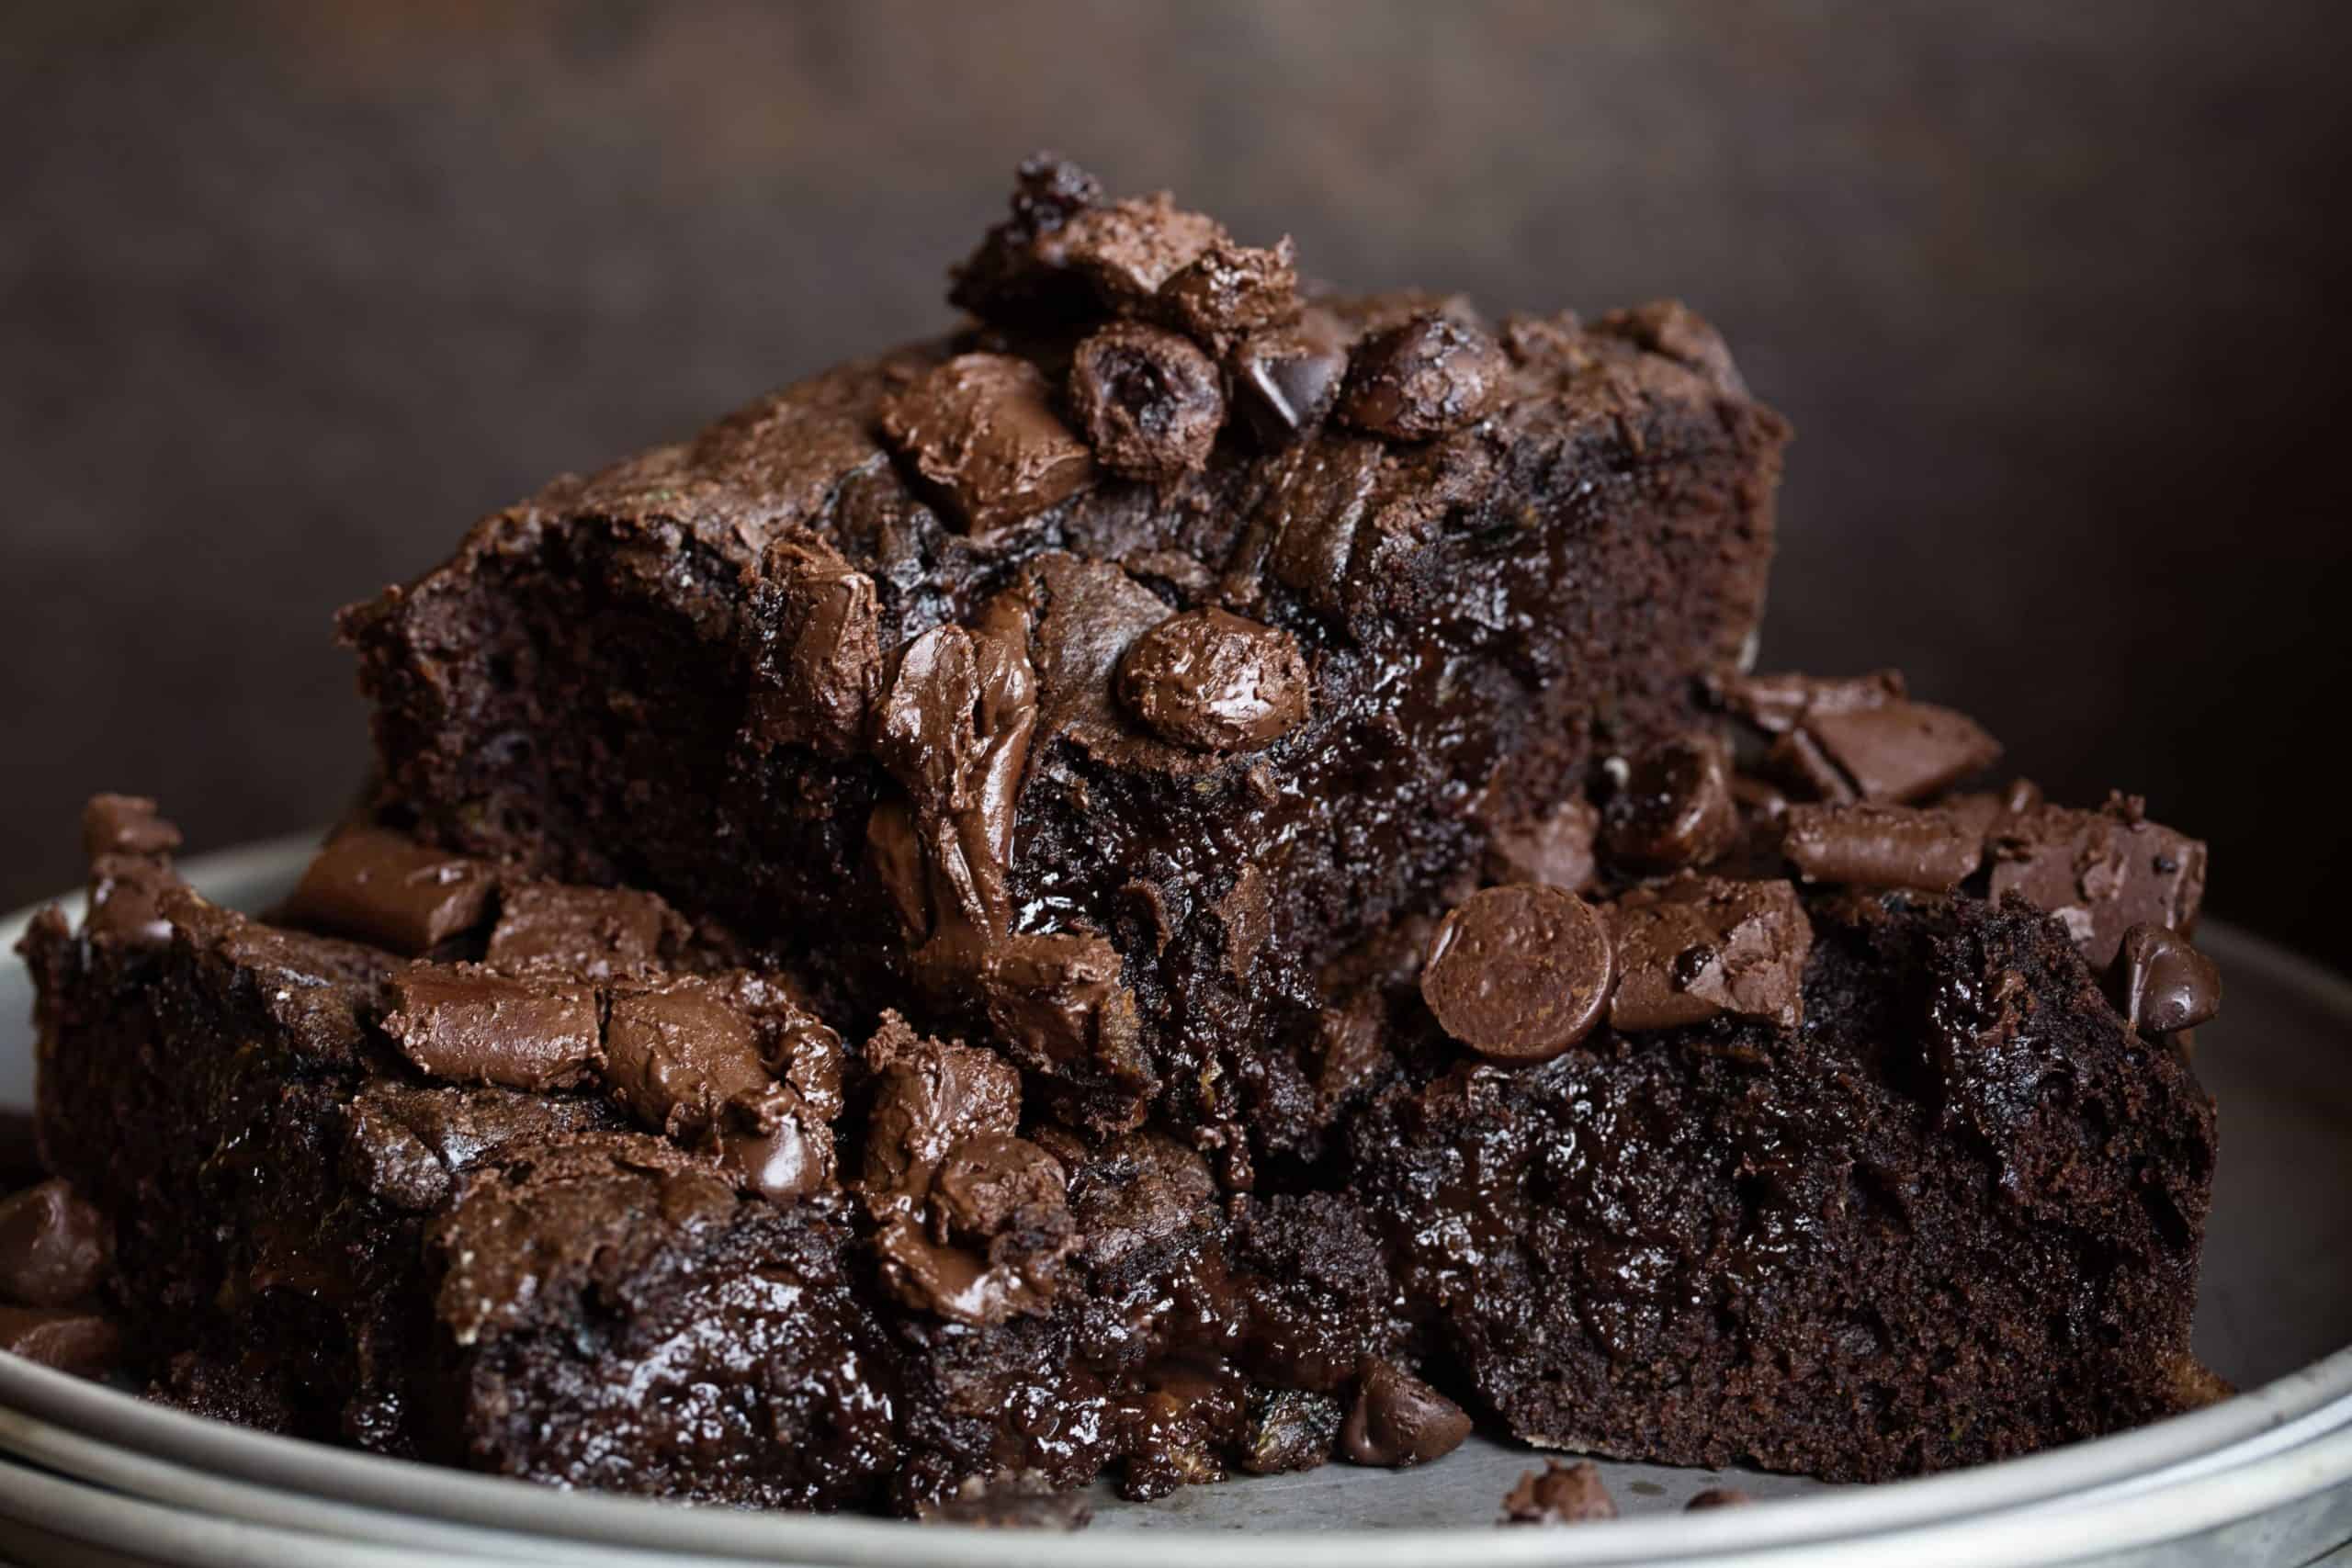 The most decadent brownie ever!